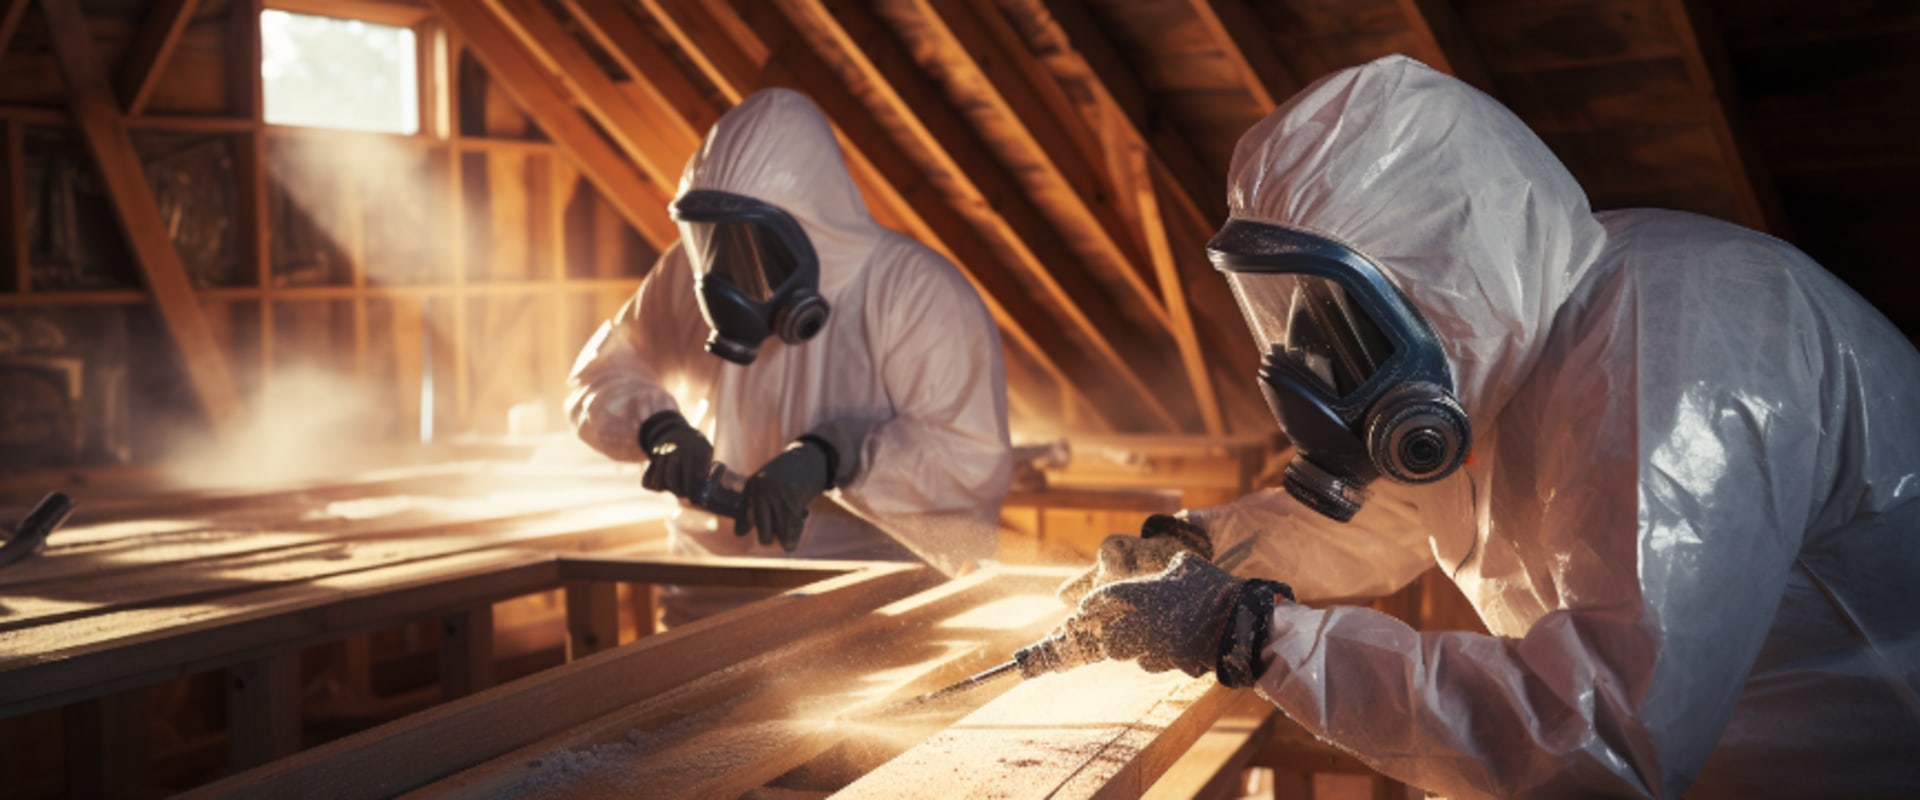 Professional Attic Insulation Installation Service in Palmetto Bay FL: Enhance Efficiency With Air Conditioning Filters